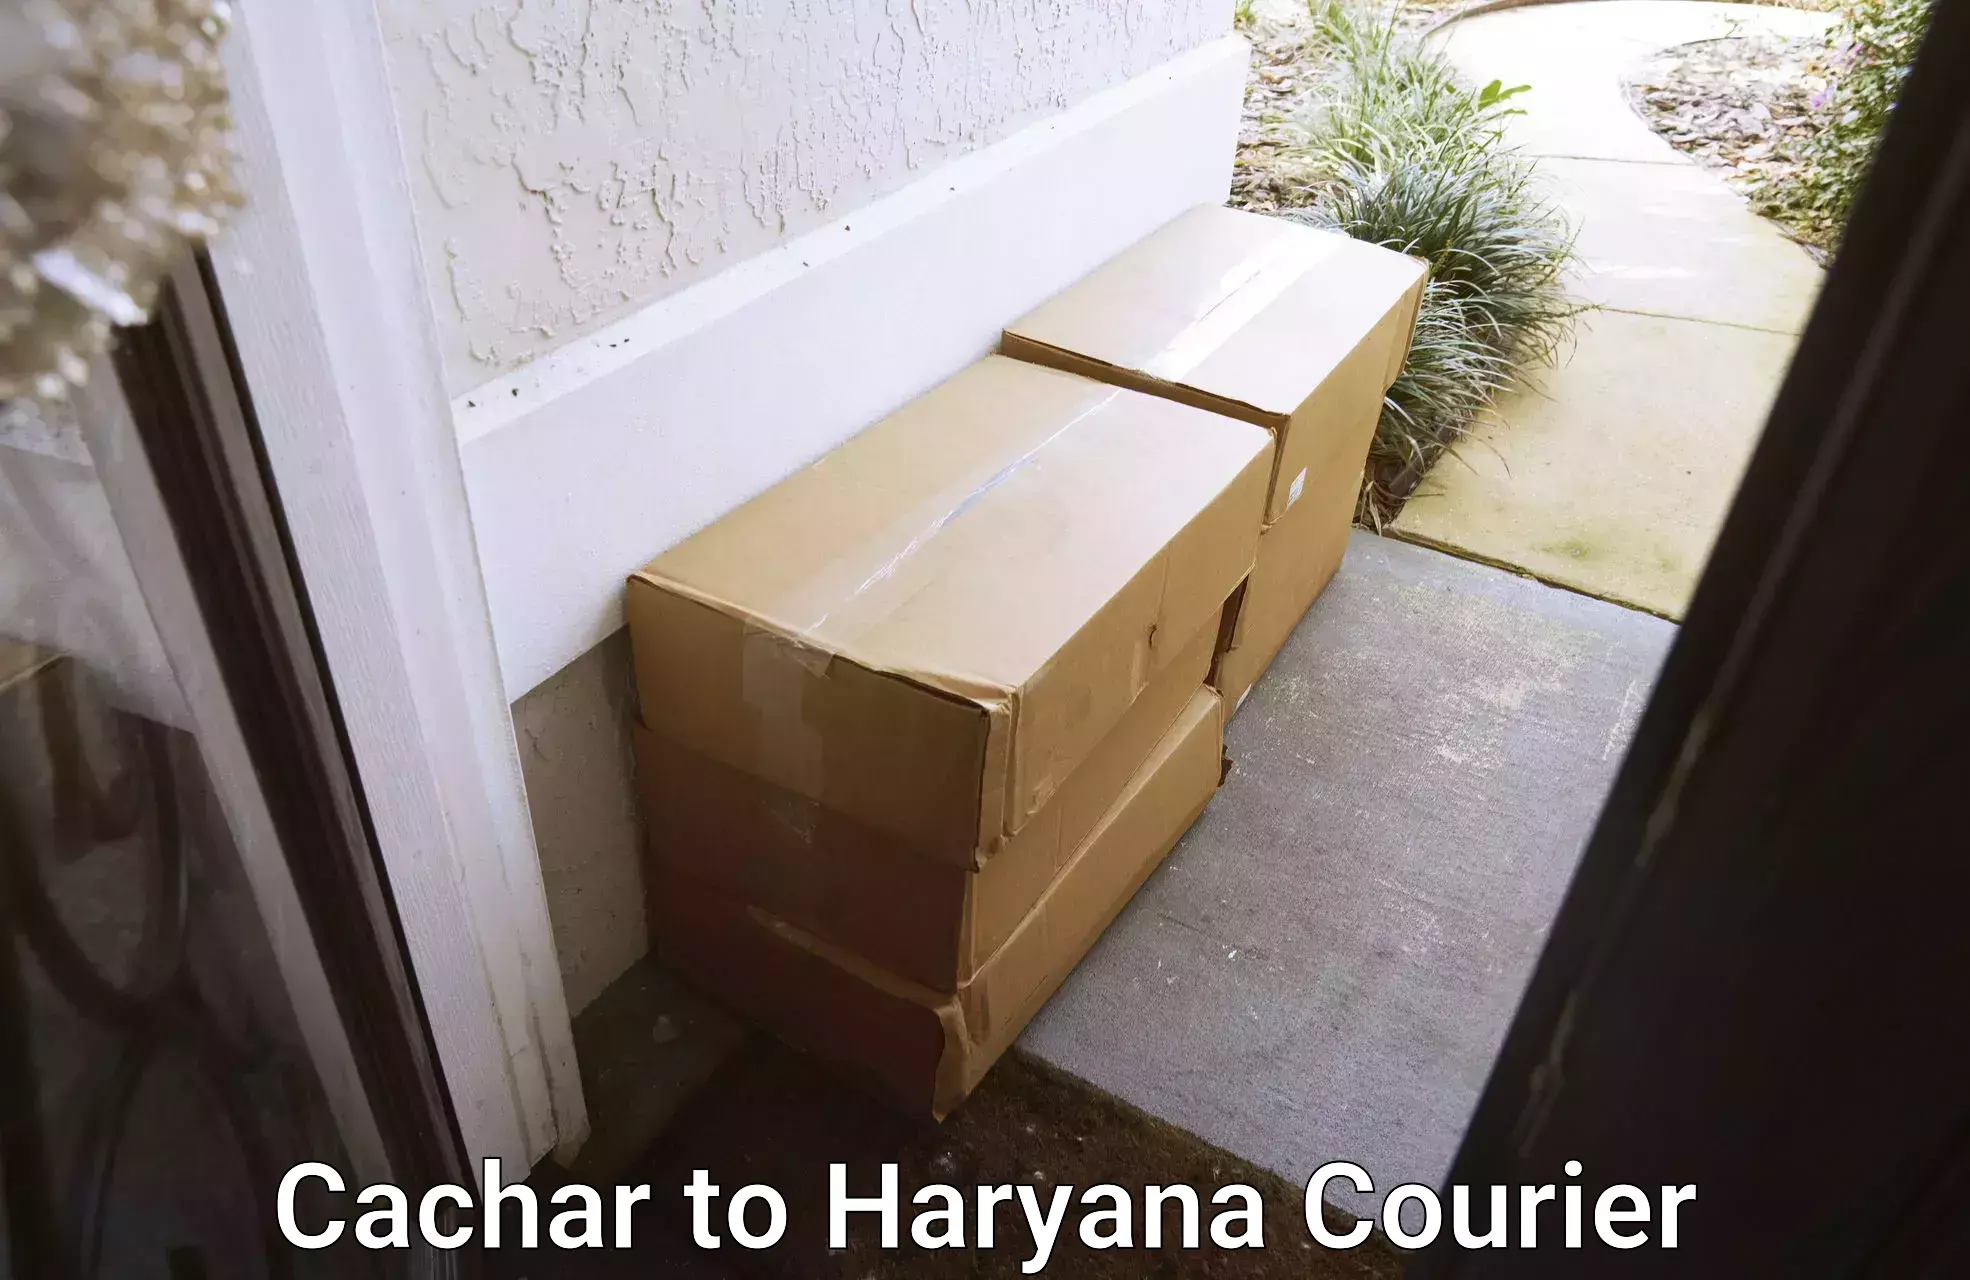 Heavy parcel delivery Cachar to NCR Haryana